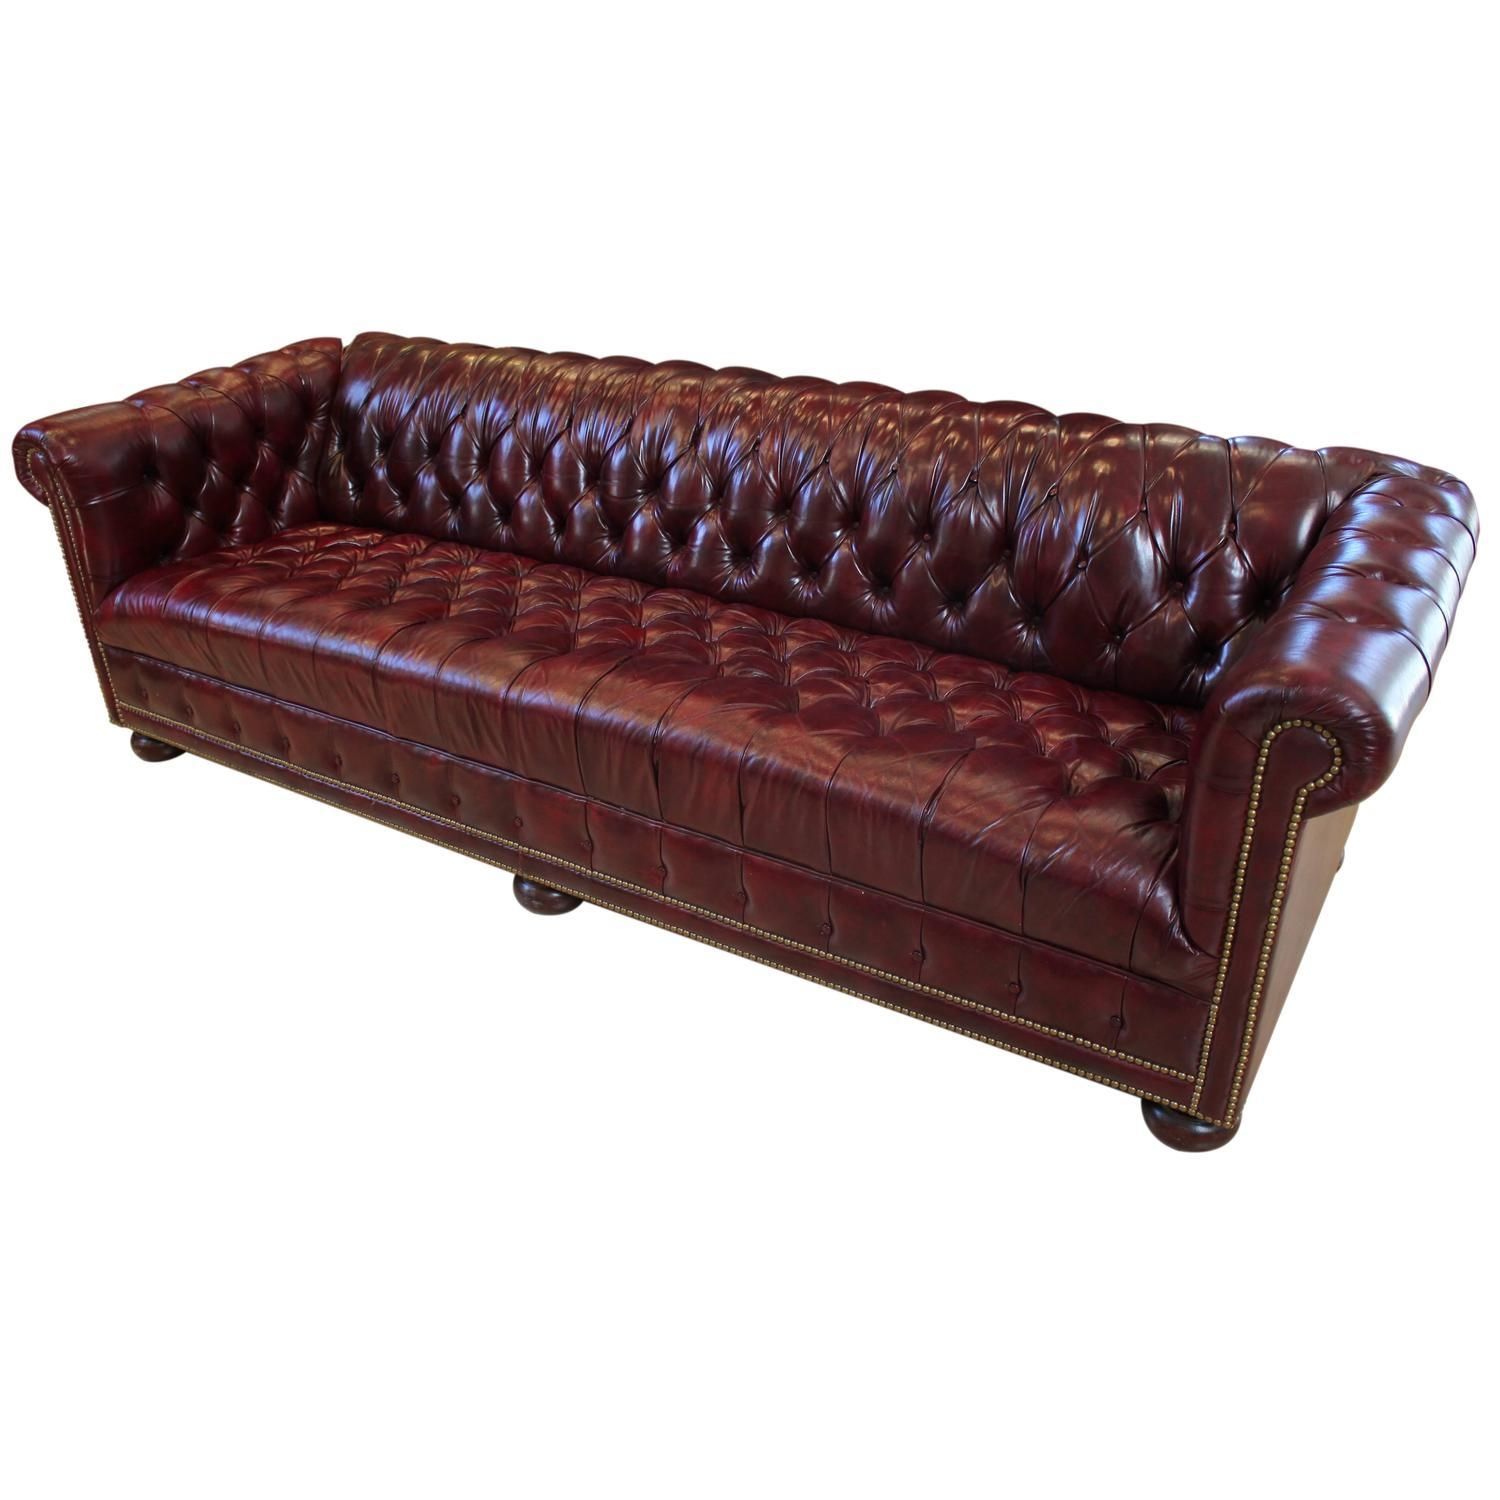 Vintage Tufted Leather 8' Chesterfield Sofa At 1stdibs With Regard To Vintage Chesterfield Sofas (View 13 of 20)